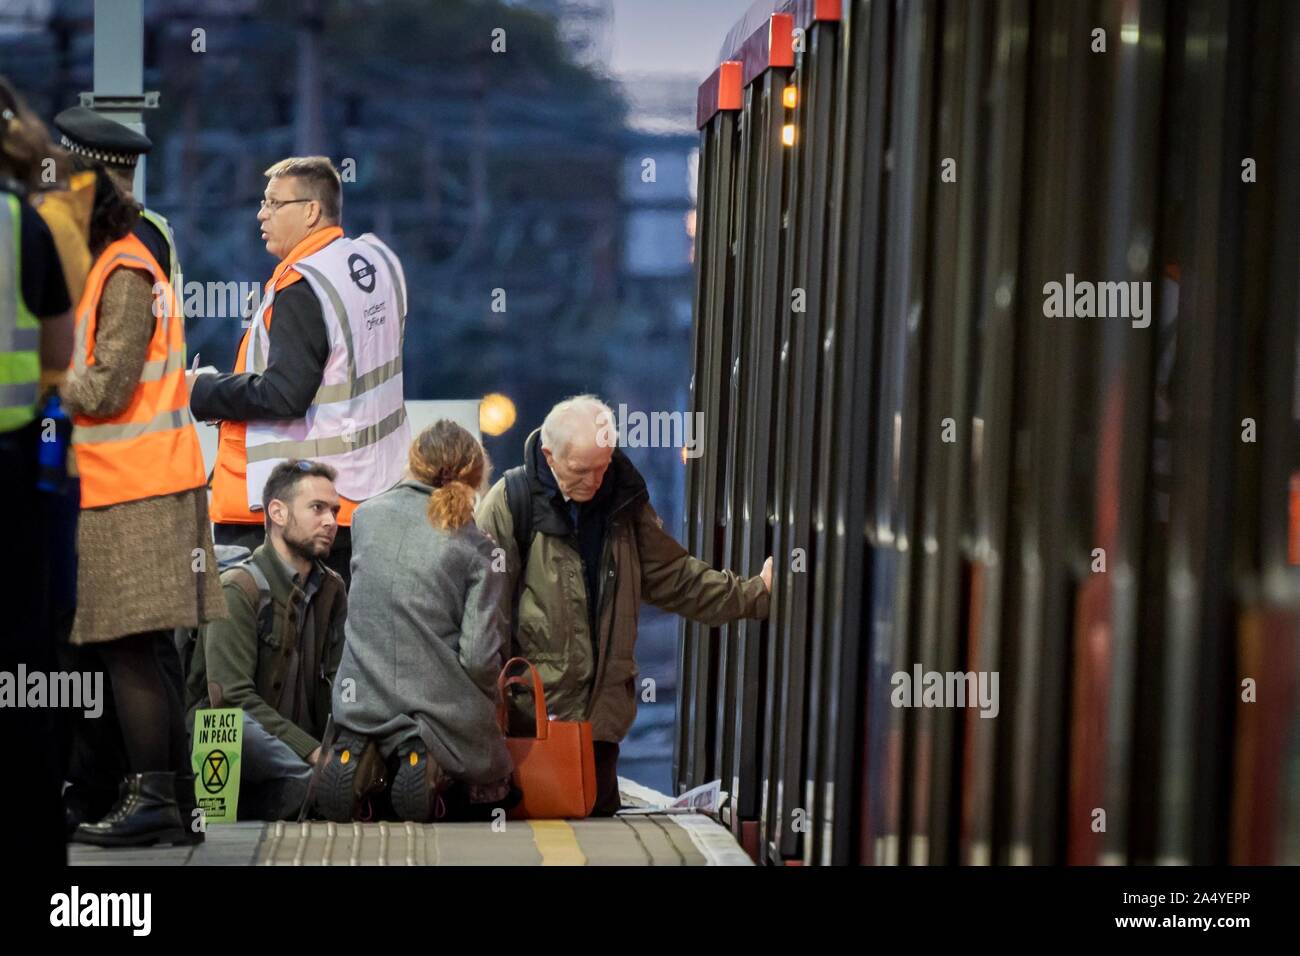 London, UK. 17th Oct, 2019. Members of Christian Climate Action disrupt a DLR train at Shadwell station during the Extinction Rebellion protests in central London, UK. Credit: Vladimir Morozov/Alamy Live News Stock Photo